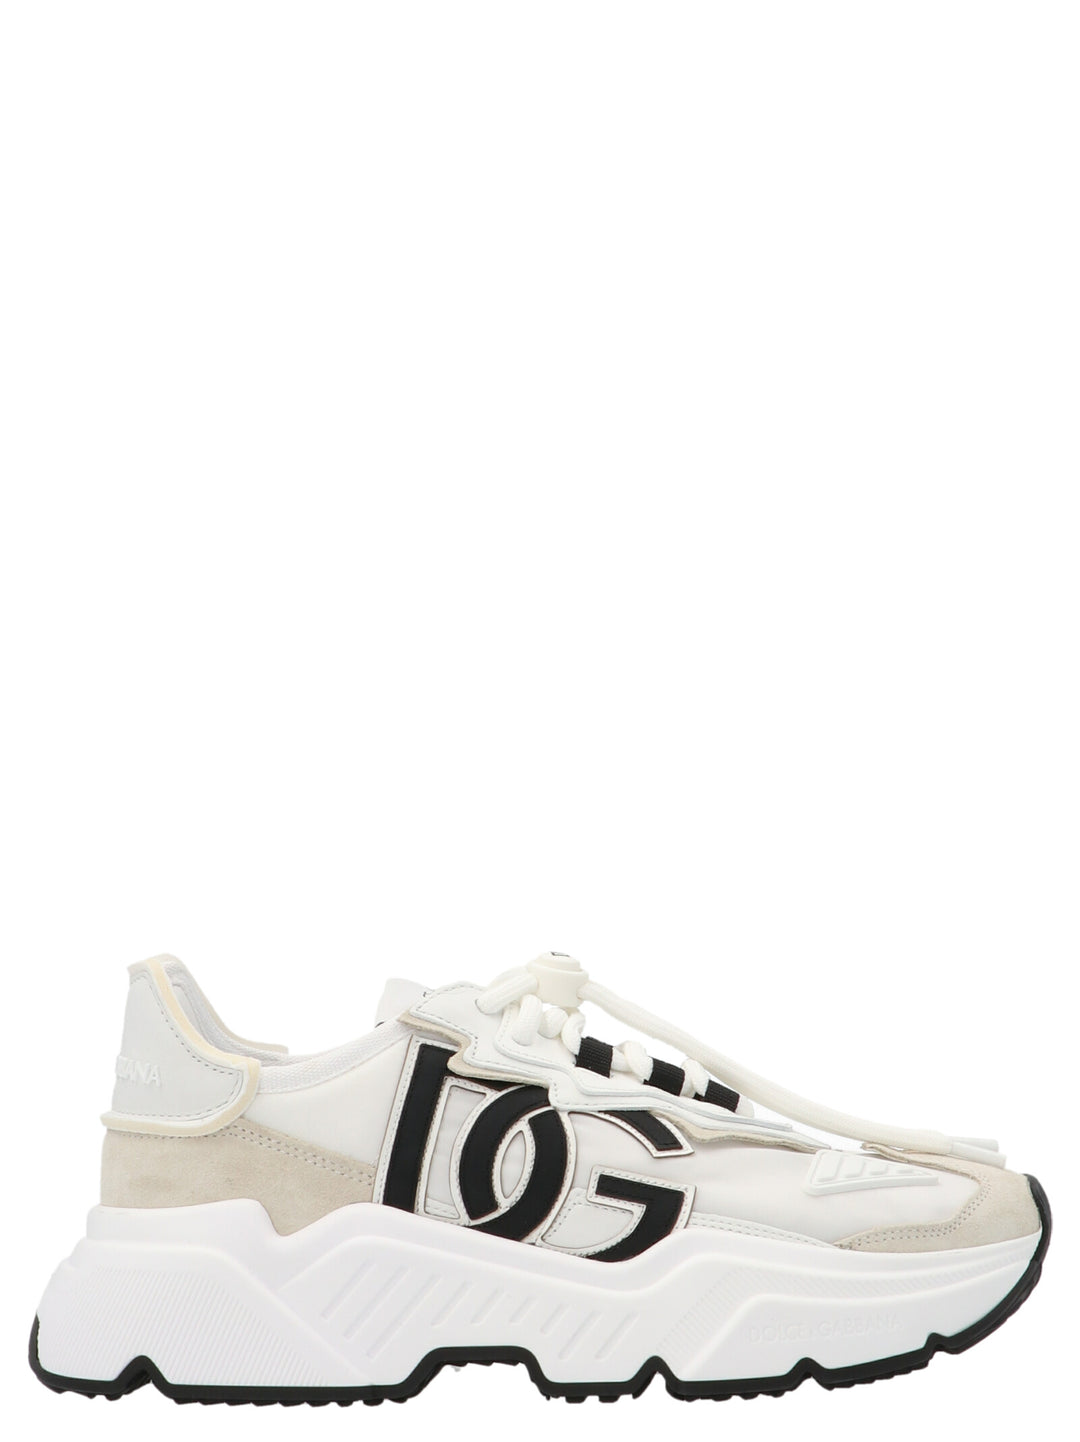 'Daymaster’ Sneakers Bianco